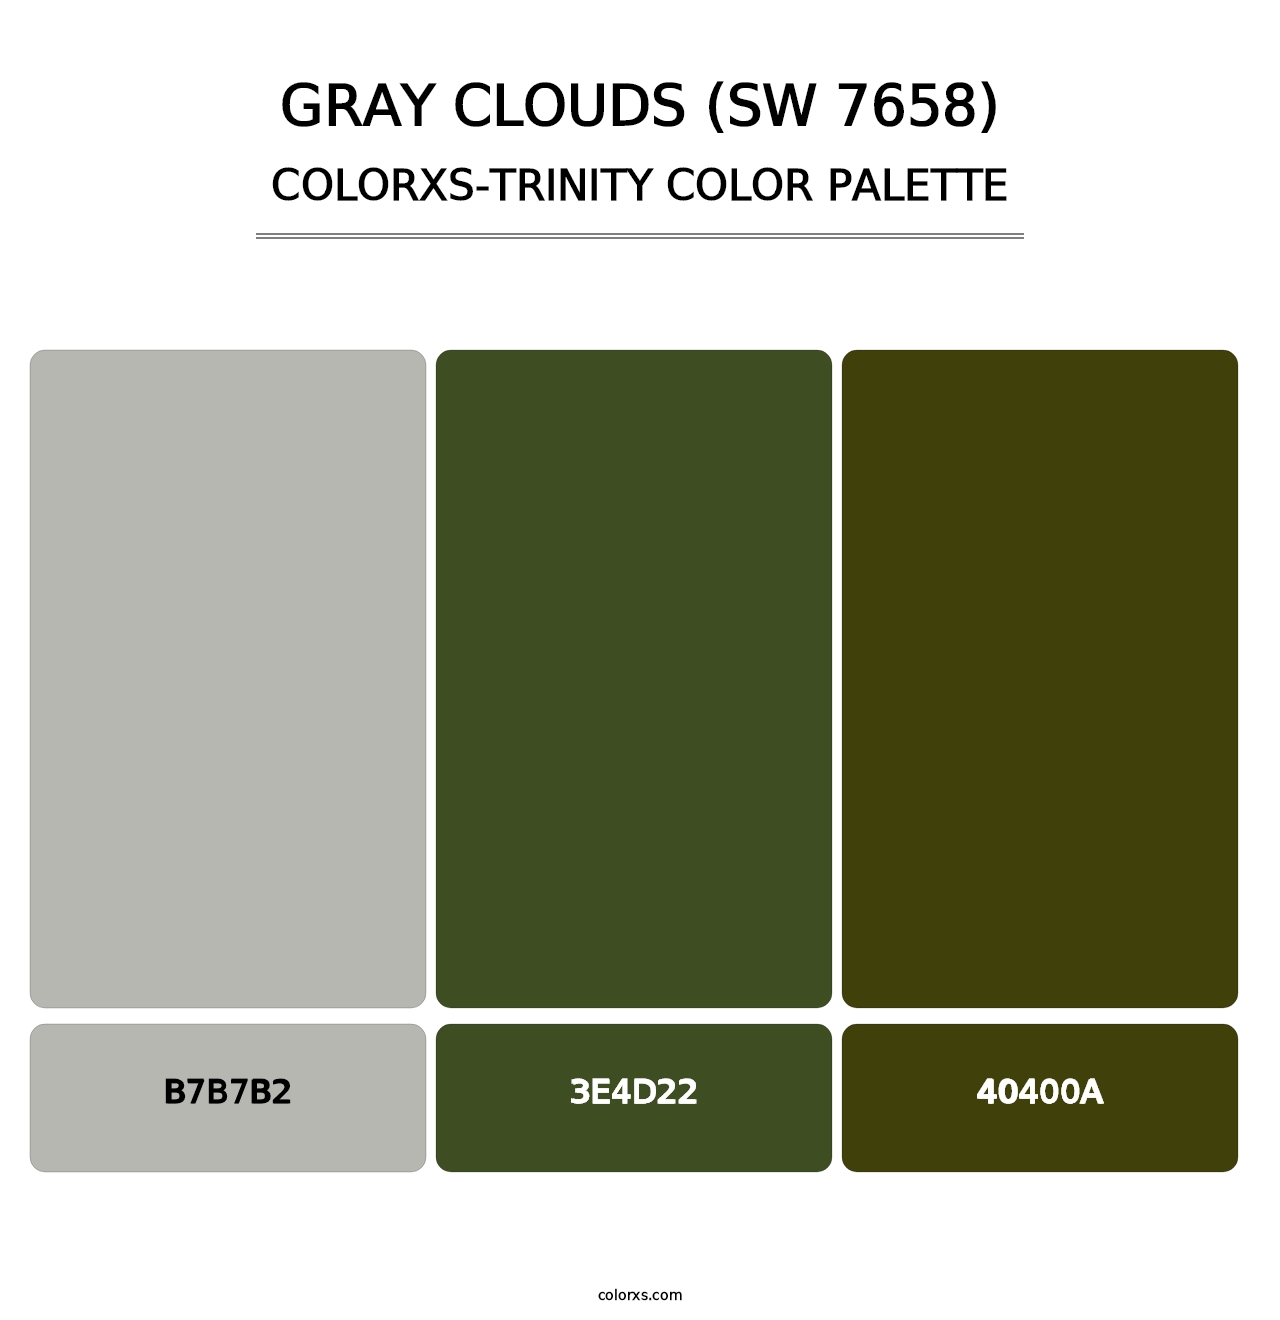 Gray Clouds (SW 7658) - Colorxs Trinity Palette